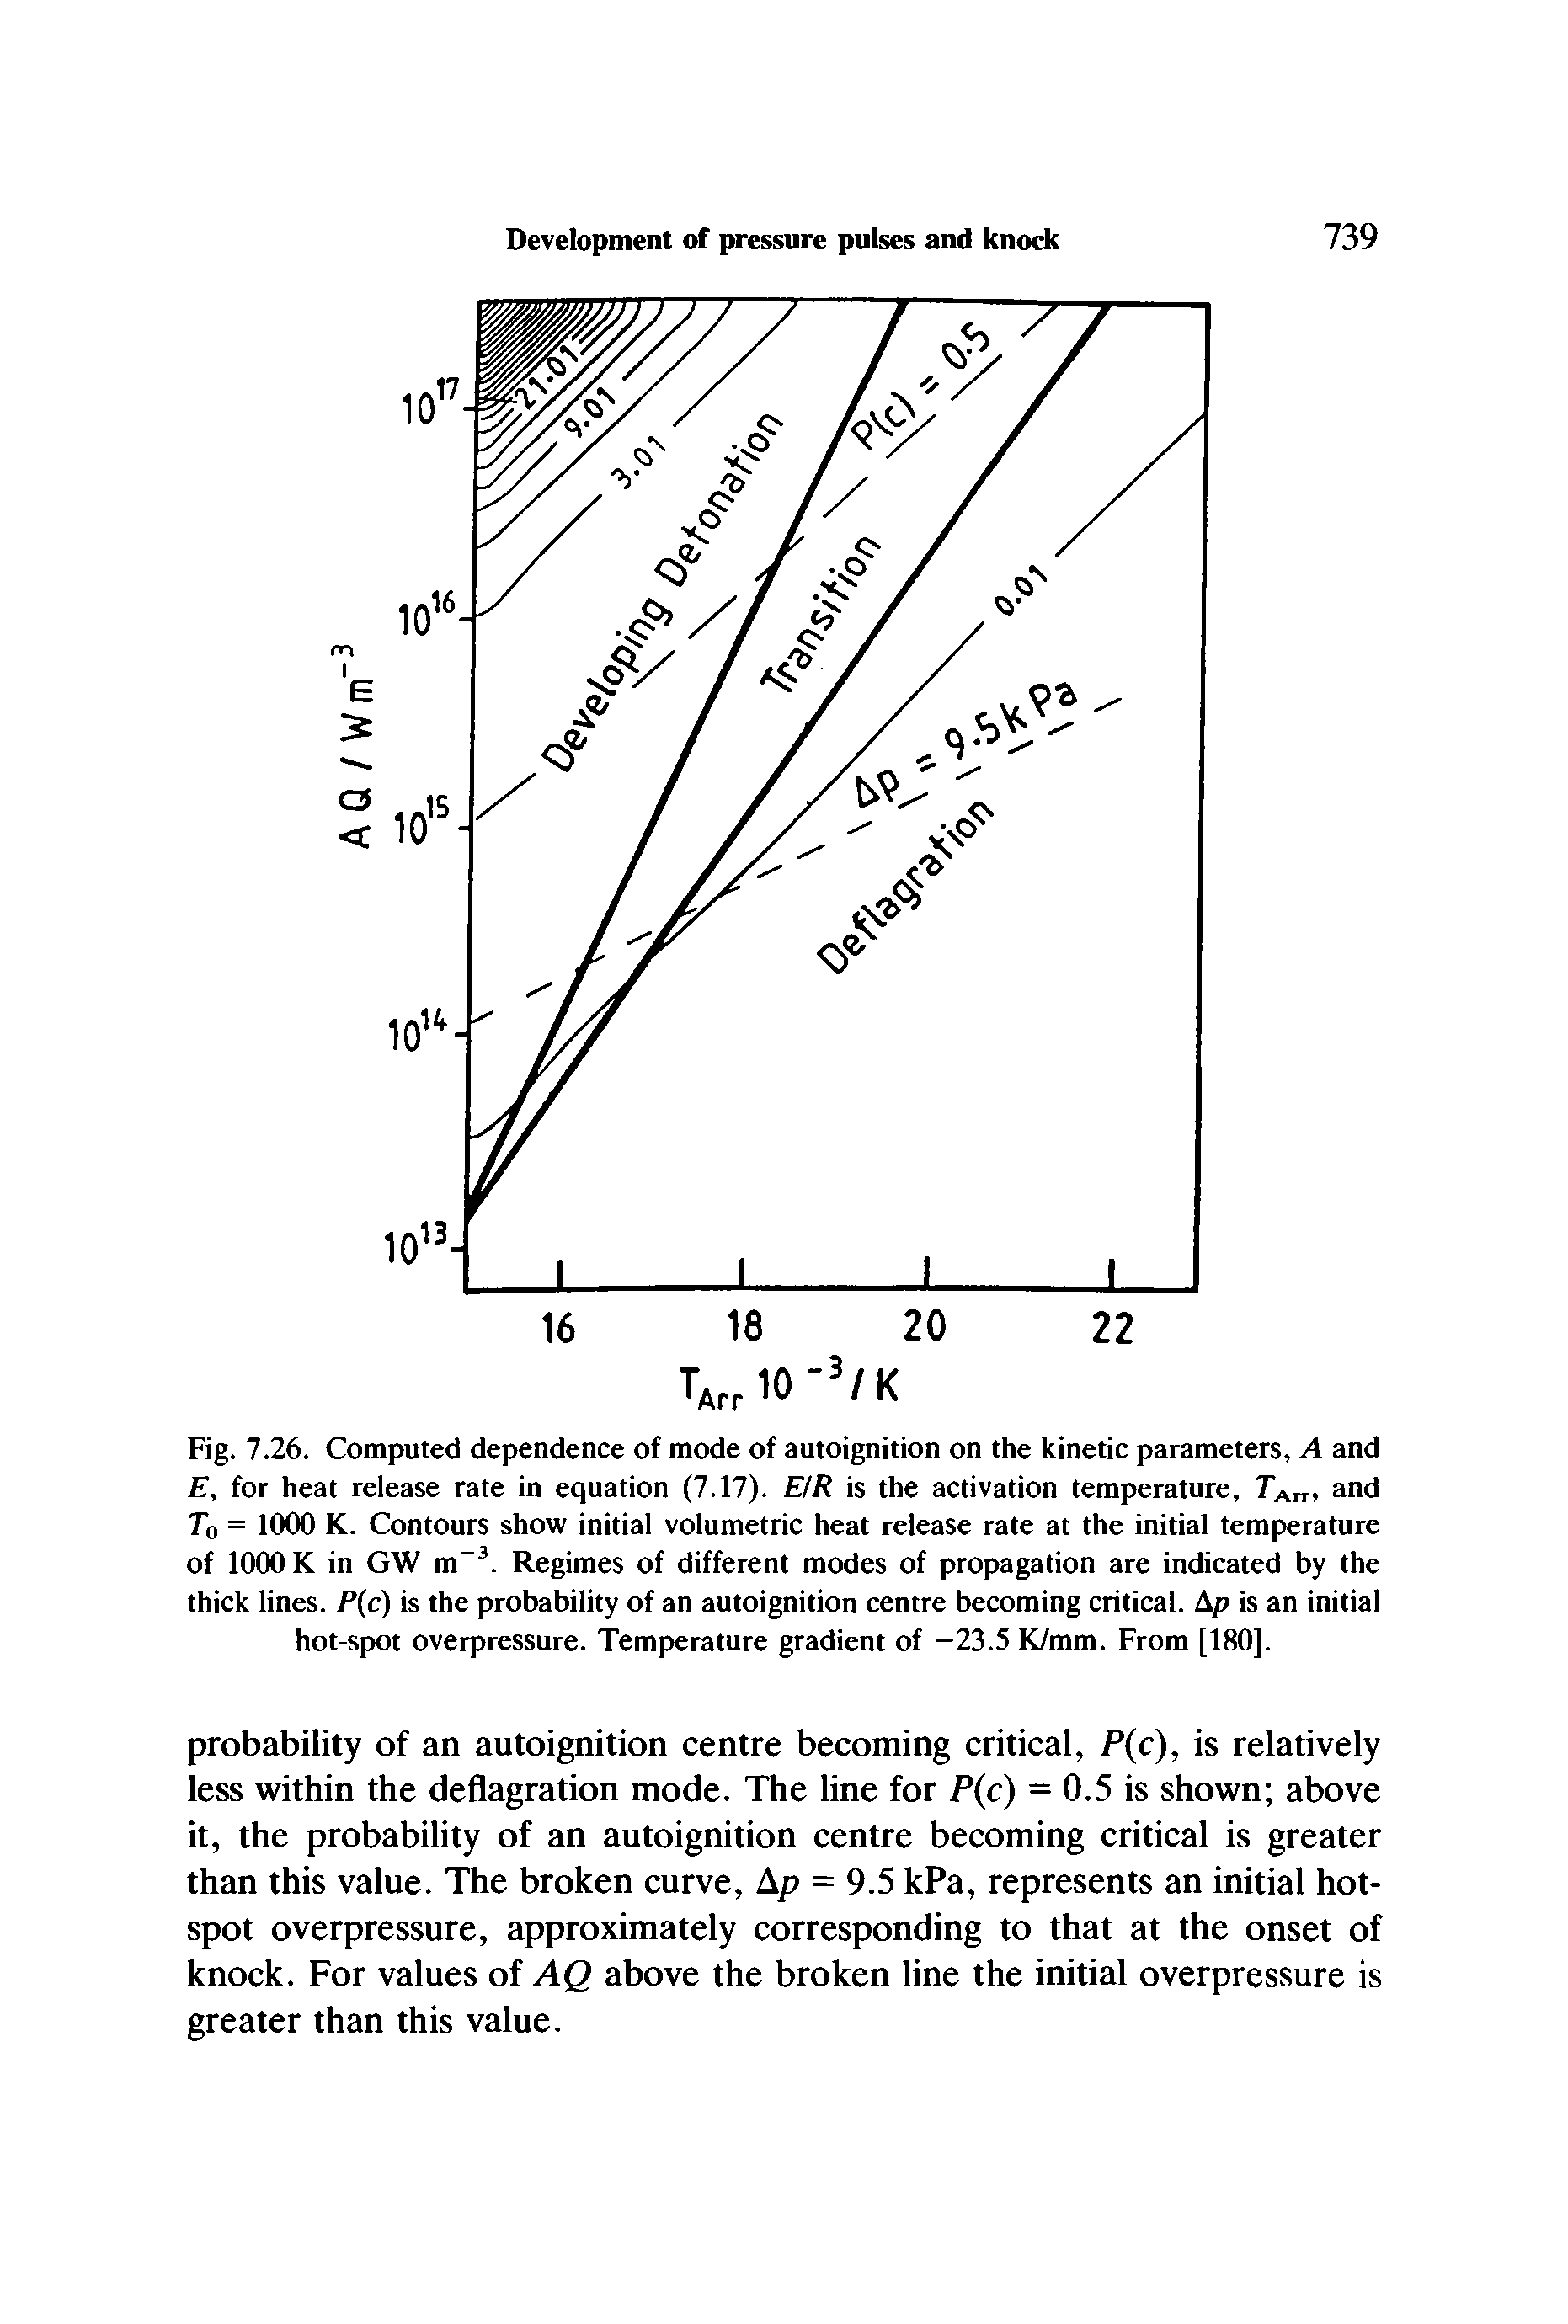 Fig. 7.26. Computed dependence of mode of autoignition on the kinetic parameters, A and E, for heat release rate in equation (7.17). E/R is the activation temperature, Ta , and To = 1000 K. Contours show initial volumetric heat release rate at the initial temperature of 1000 K in GW m . Regimes of different modes of propagation are indicated by the thick lines. P(c) is the probability of an autoignition centre becoming critical. Ap is an initial hot-spot overpressure. Temperature gradient of -23.5 K/mm. From [180].